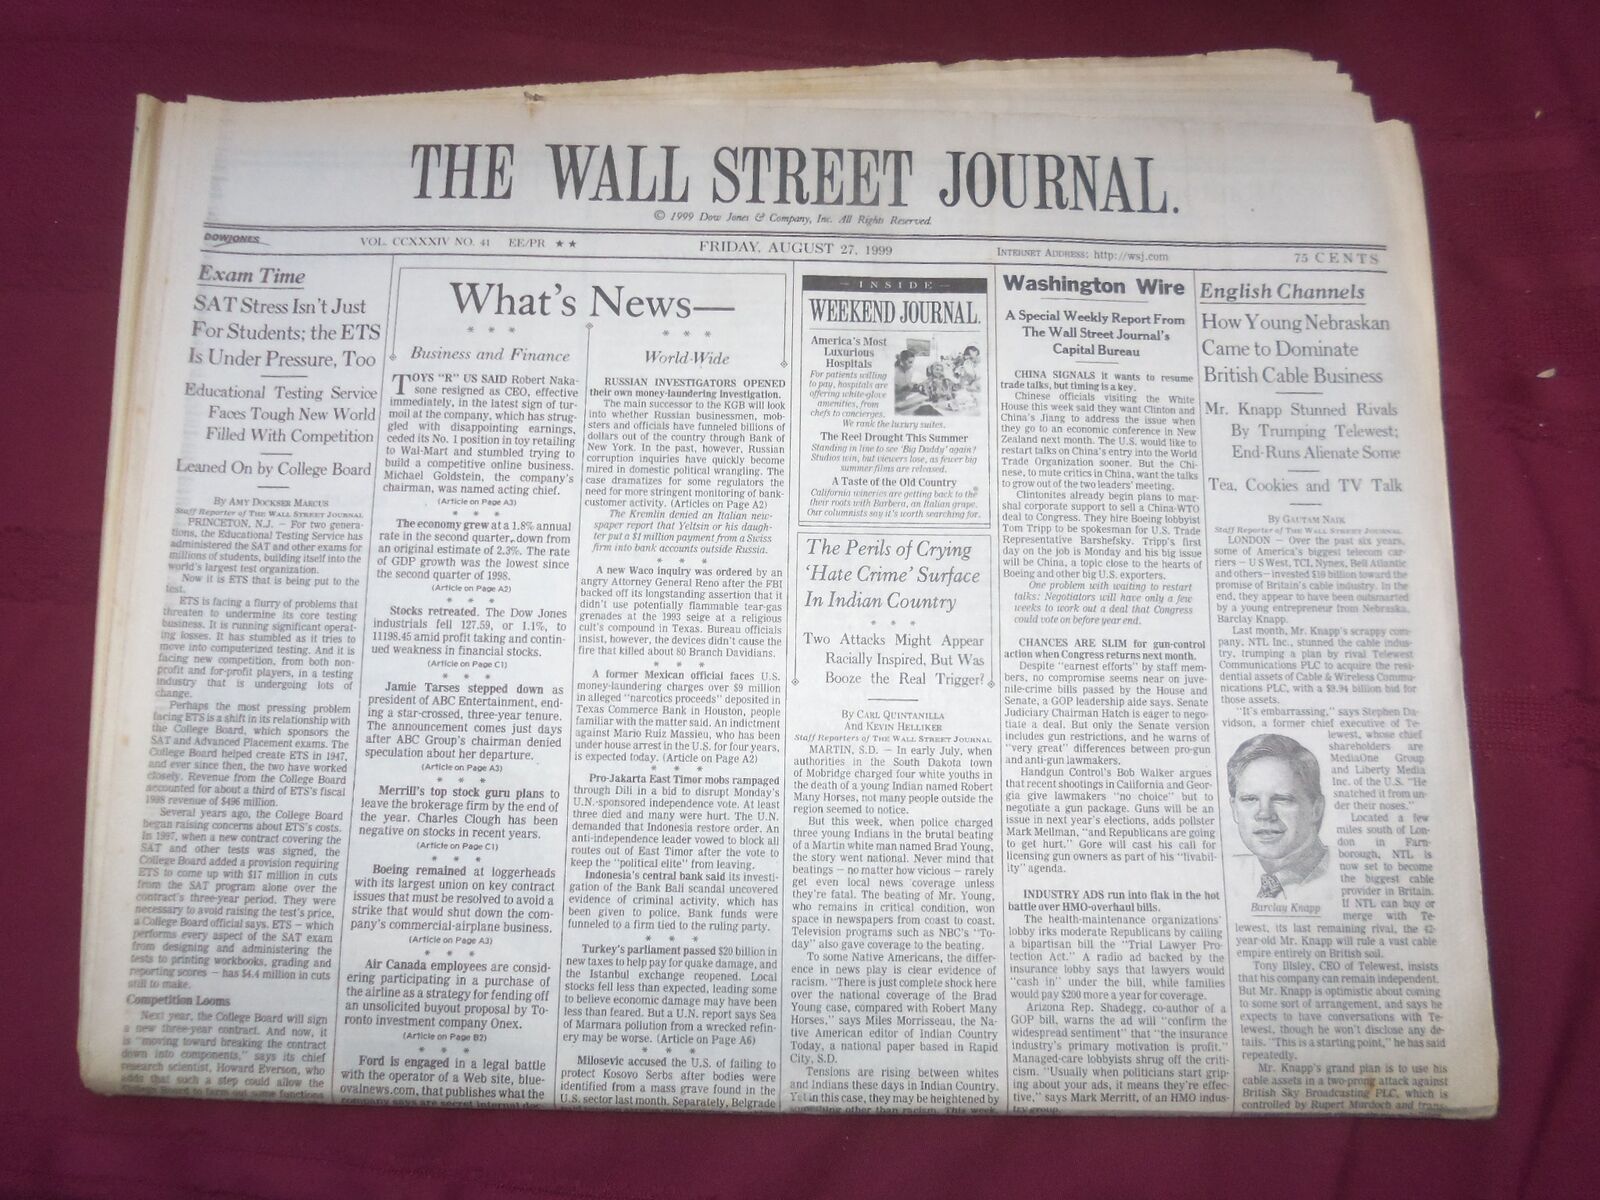 1999 AUG 27 THE WALL STREET JOURNAL-BARCLAY KNAPP DOMINATE BRITISH CABLE- WJ 226